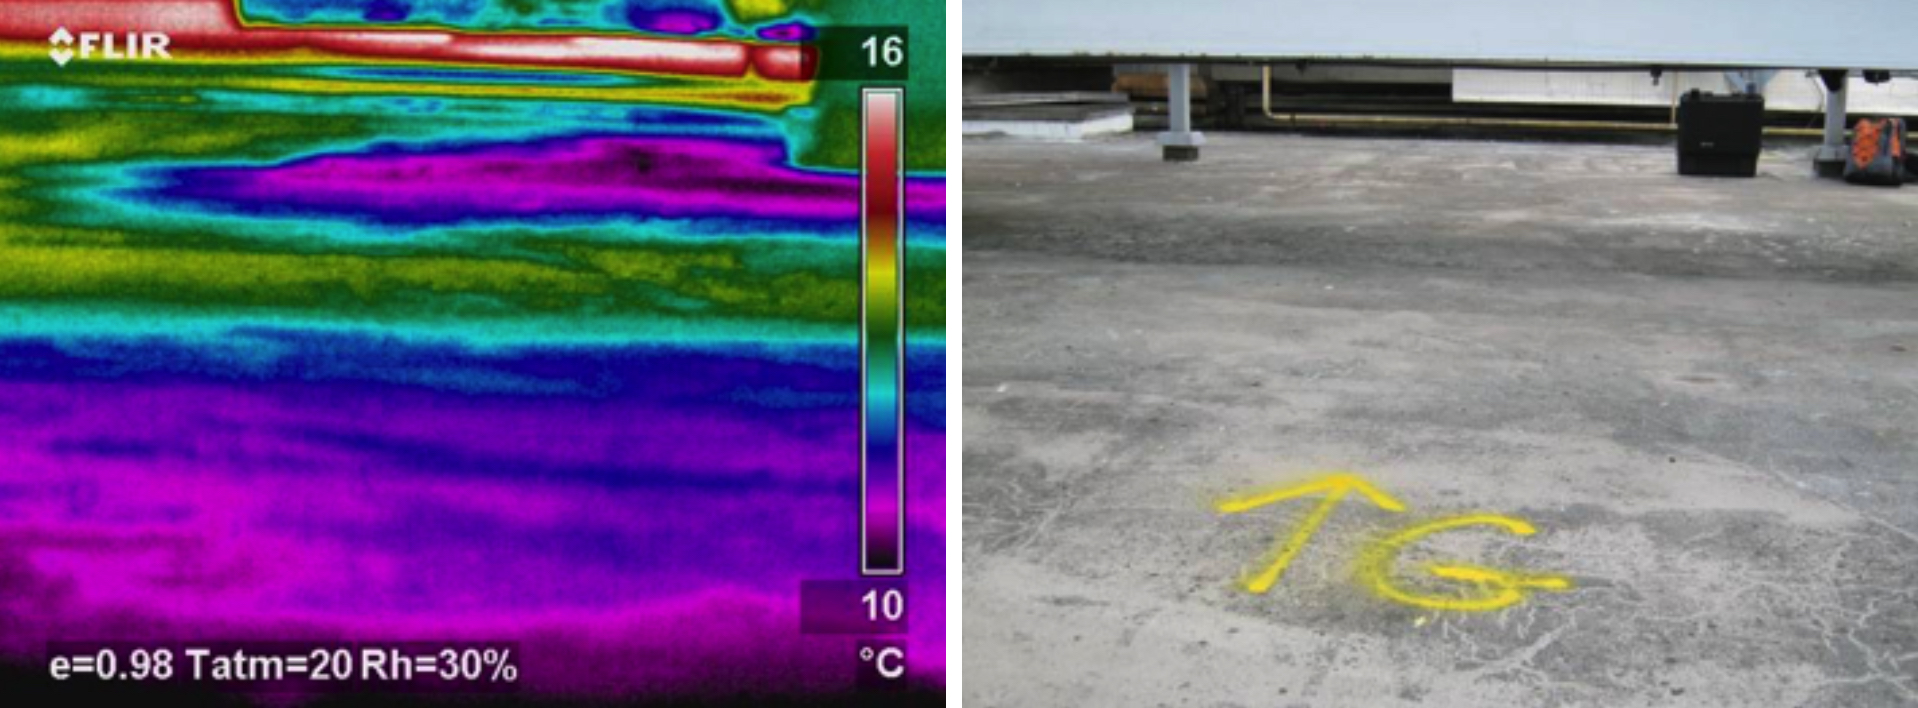 finding roof leaks with thermal imaging